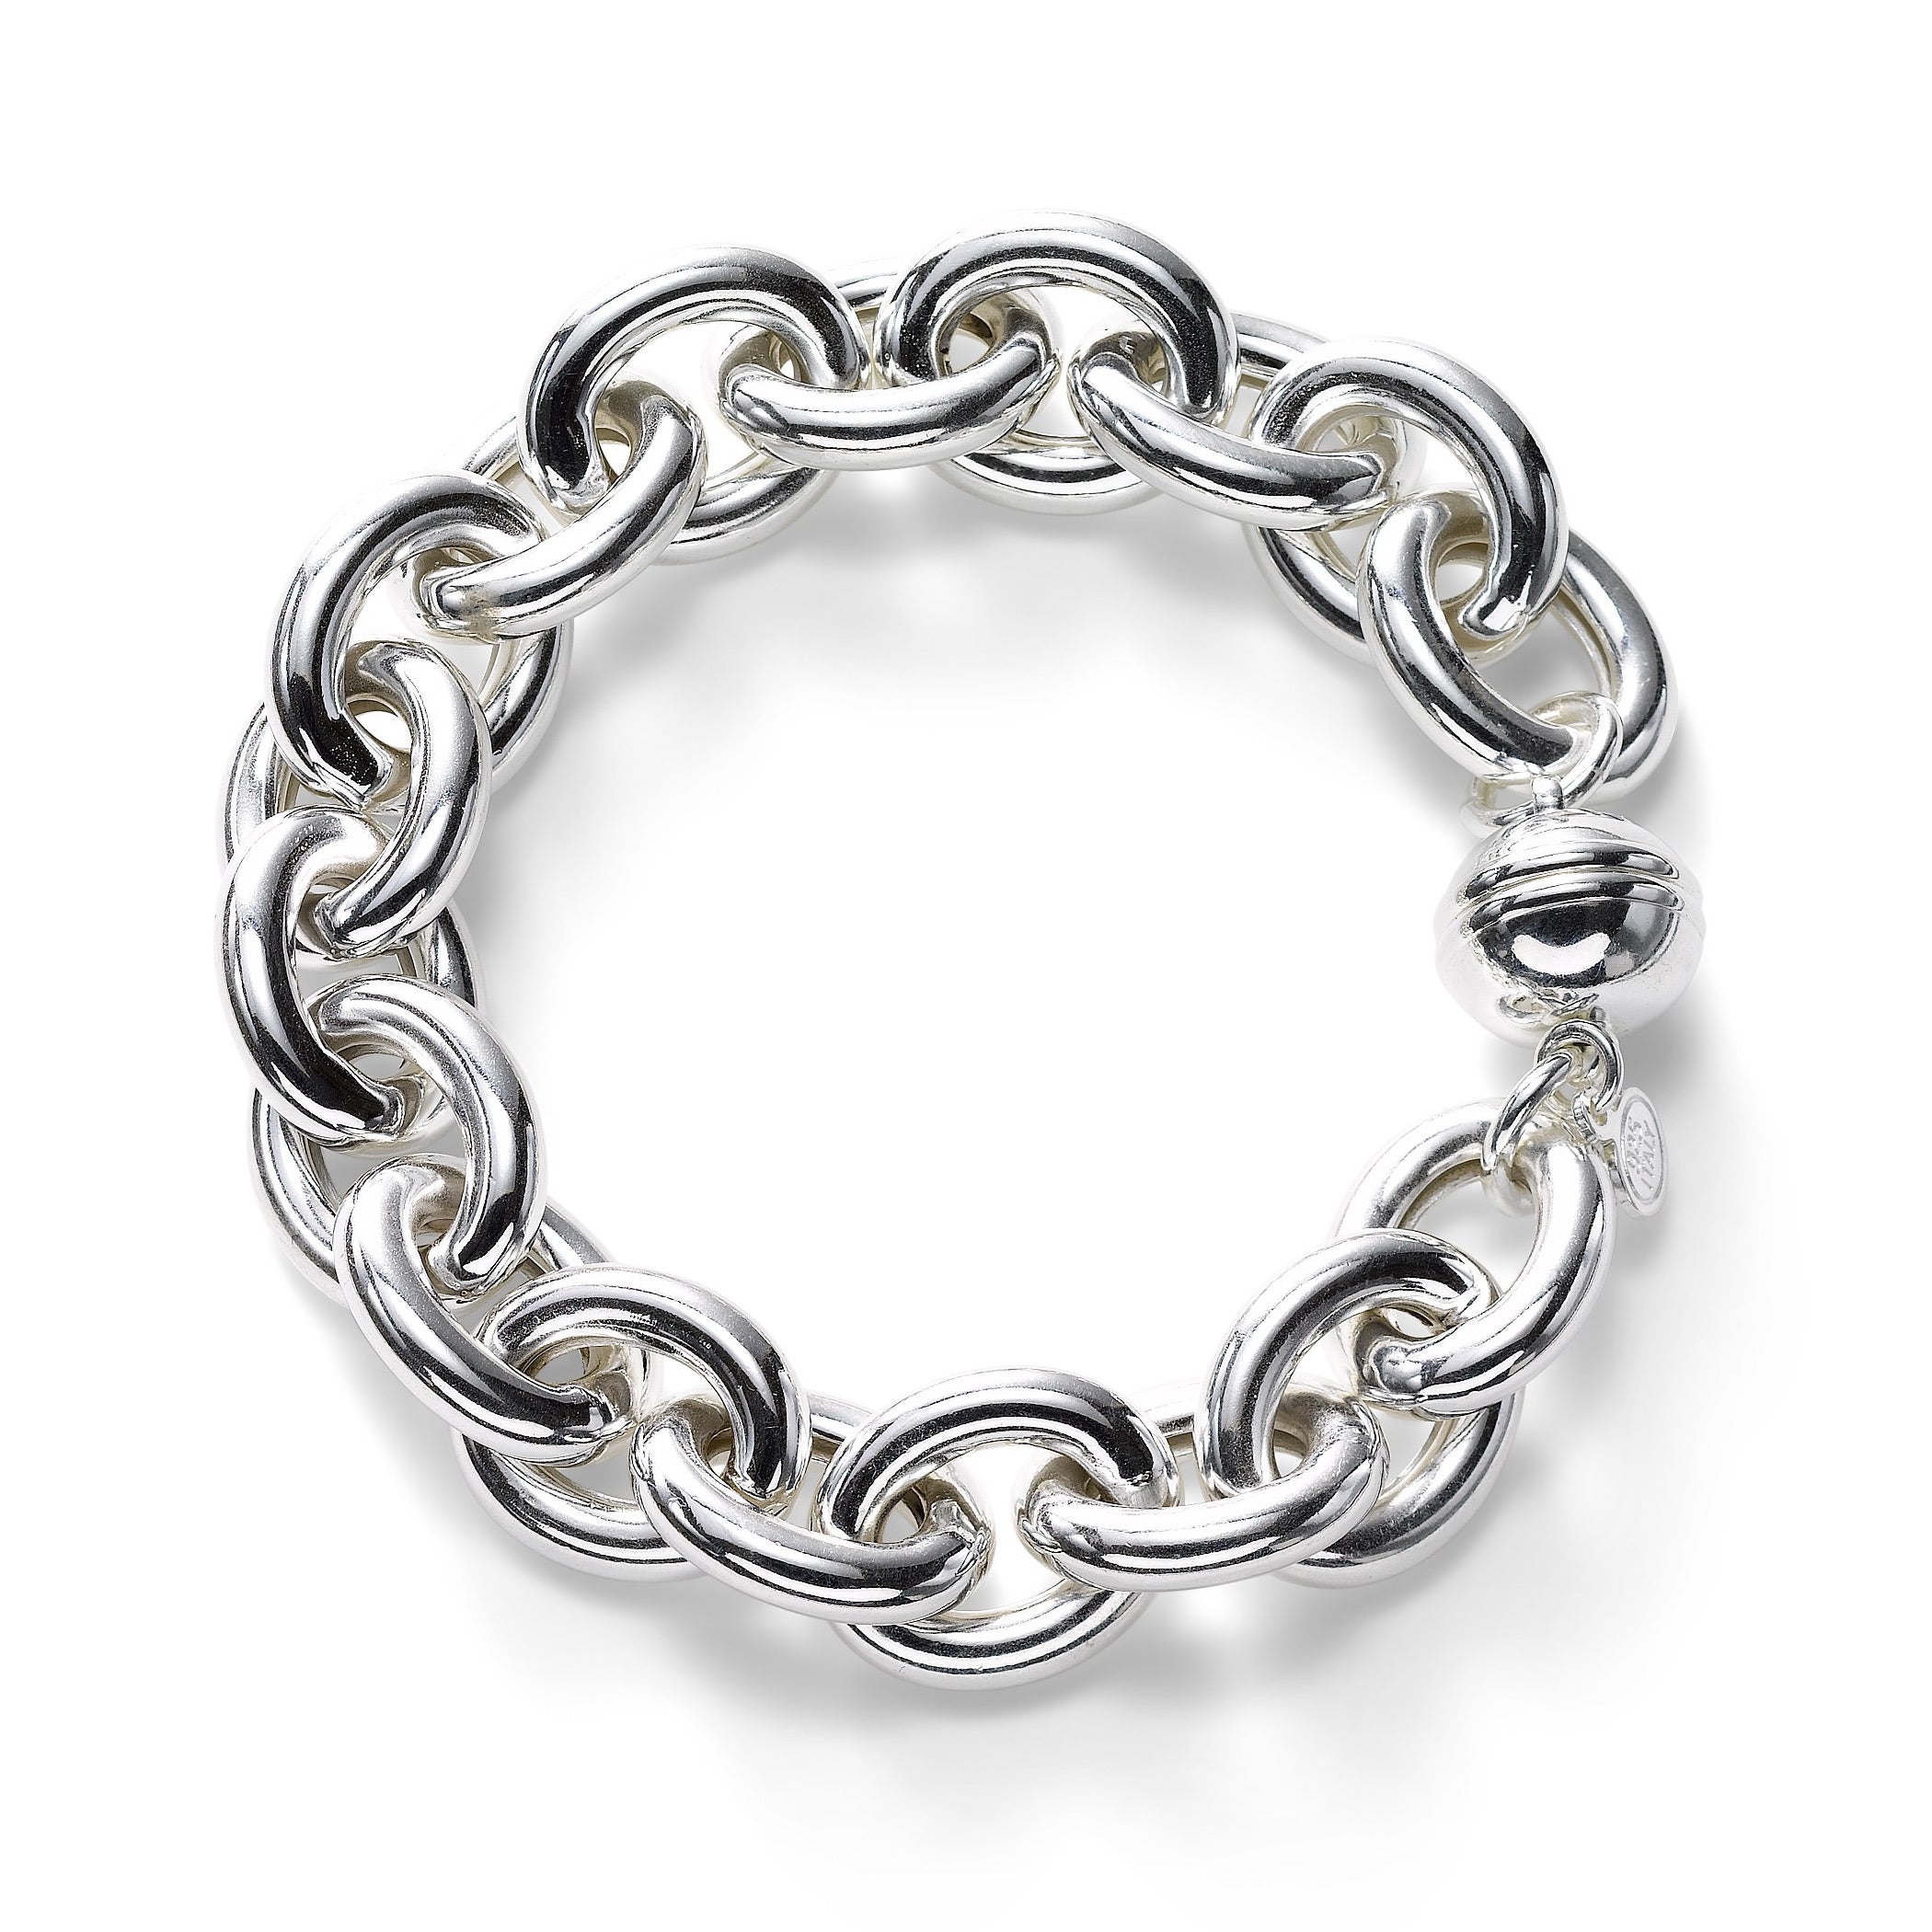 Sterling silver popcorn magnetic clasp bracelets available in various  finishes